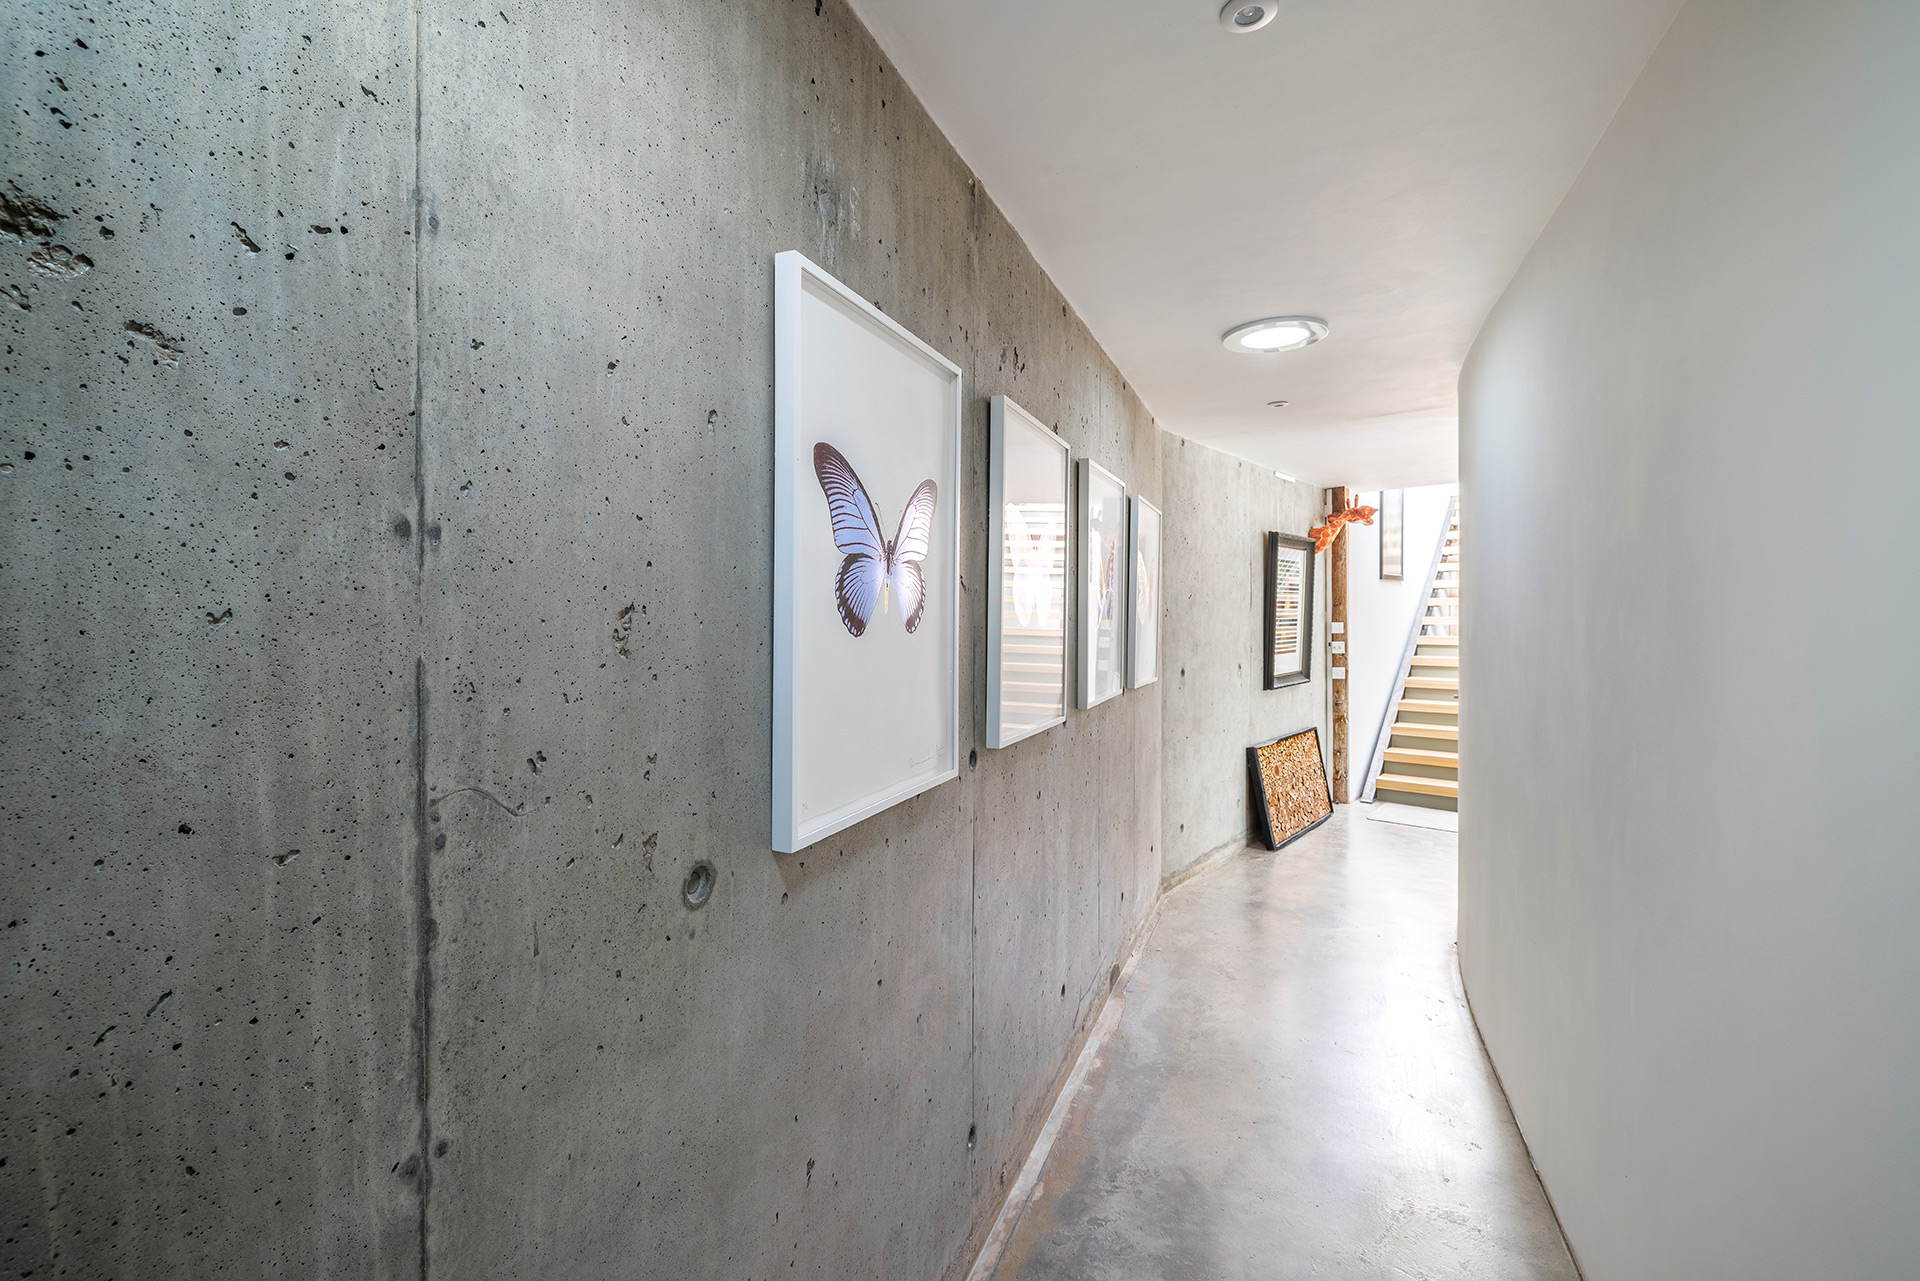 internal corridor in house with modern concrete walls and spotlights with staircase at end